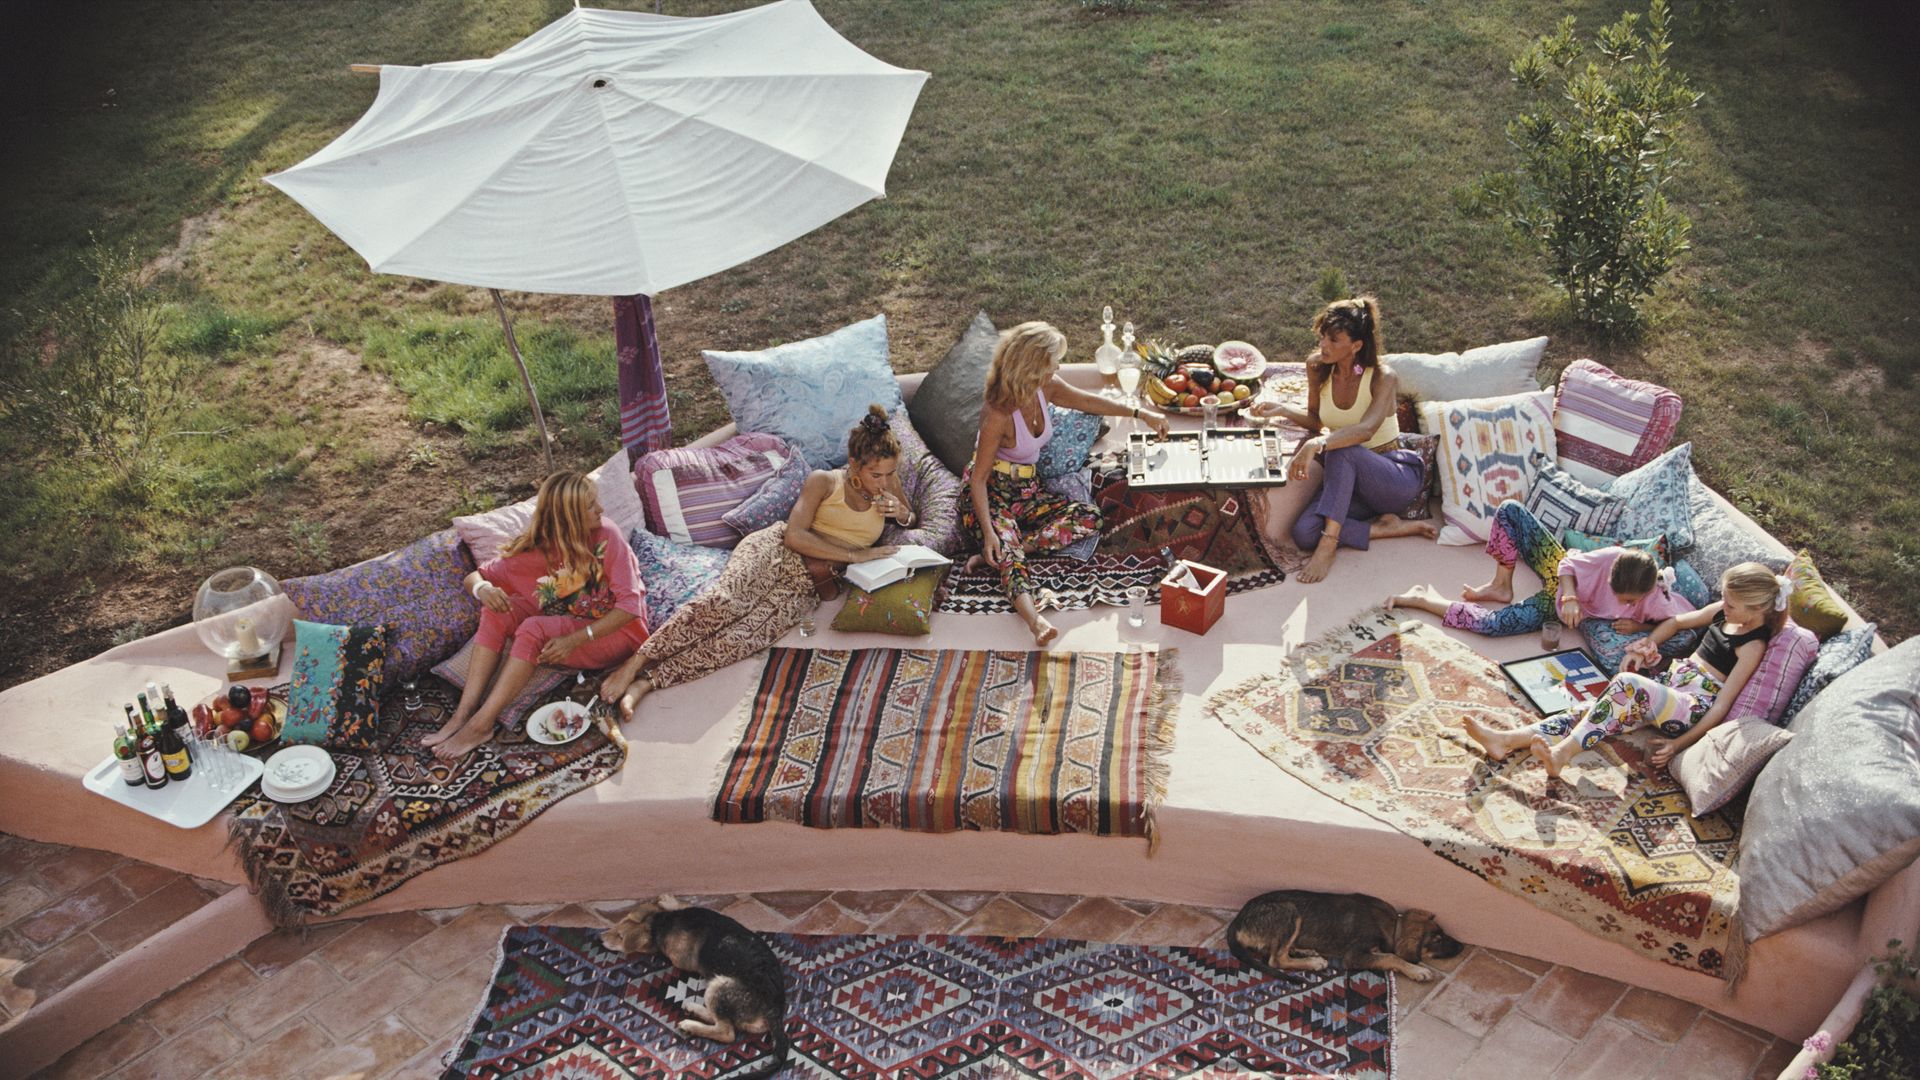 Artist Beth Batlle relaxes in the garden of her home 'Casa Rosada' with her friends Sylvia de Aragon, Mara Polo, and Carmen Uriach, Ibiza, Spain, August 1989. (Photo by Slim Aarons/Hulton Archive/Getty Images)